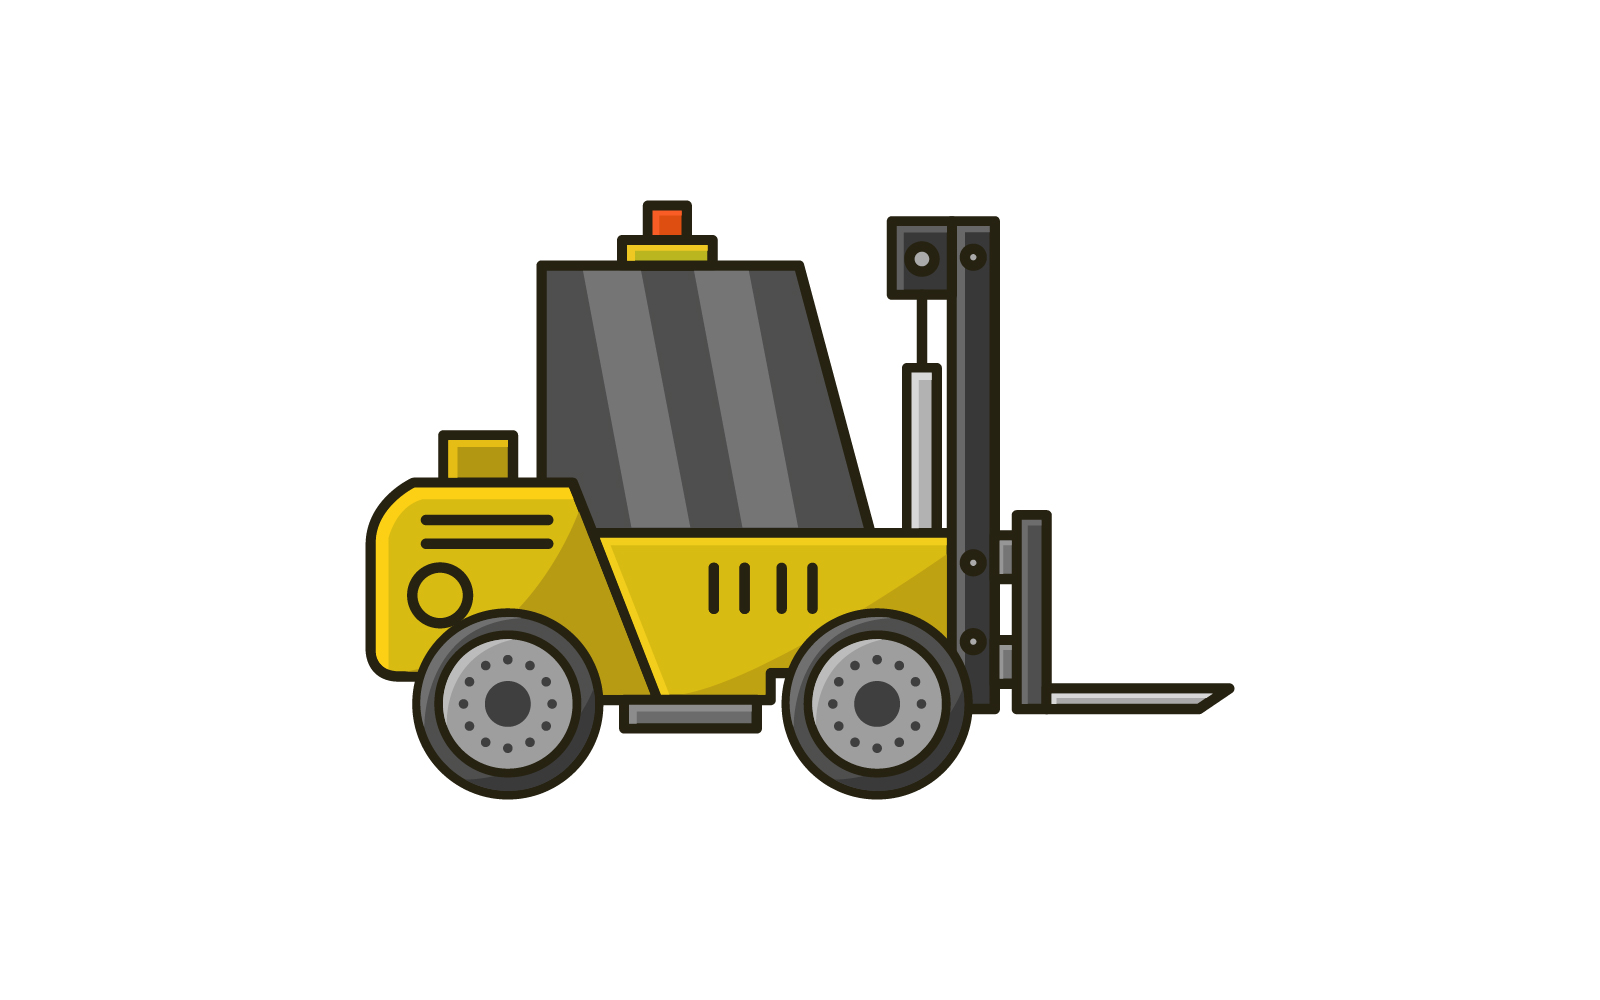 Forklift illustrated in vector on a white background